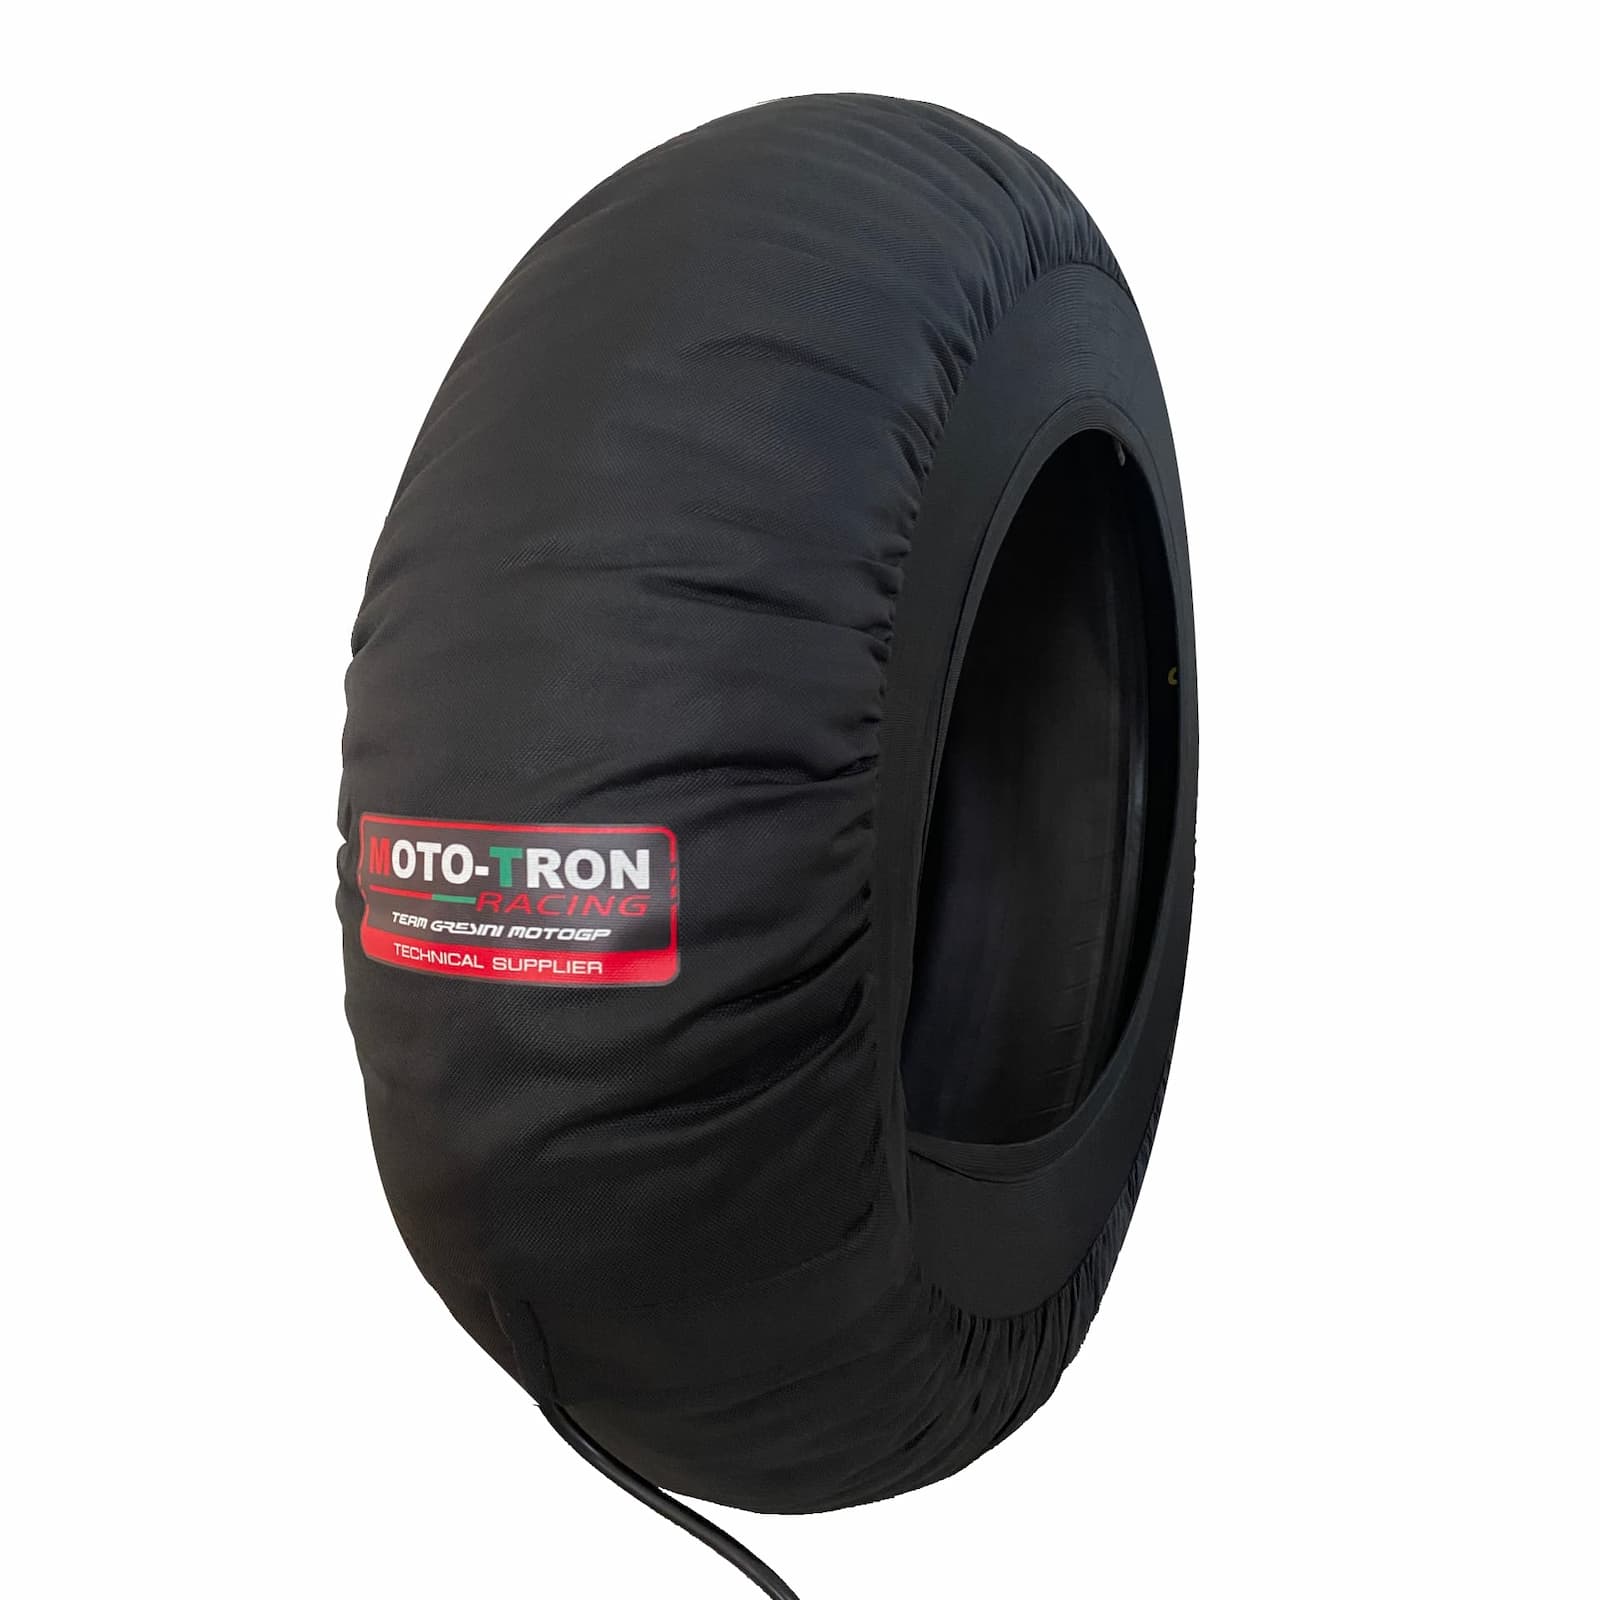 MOTO-TRON ( Moto to long ) tire warmer 17 -inch TWD 120/70/17 180/55/17 BLACK black controller attached 